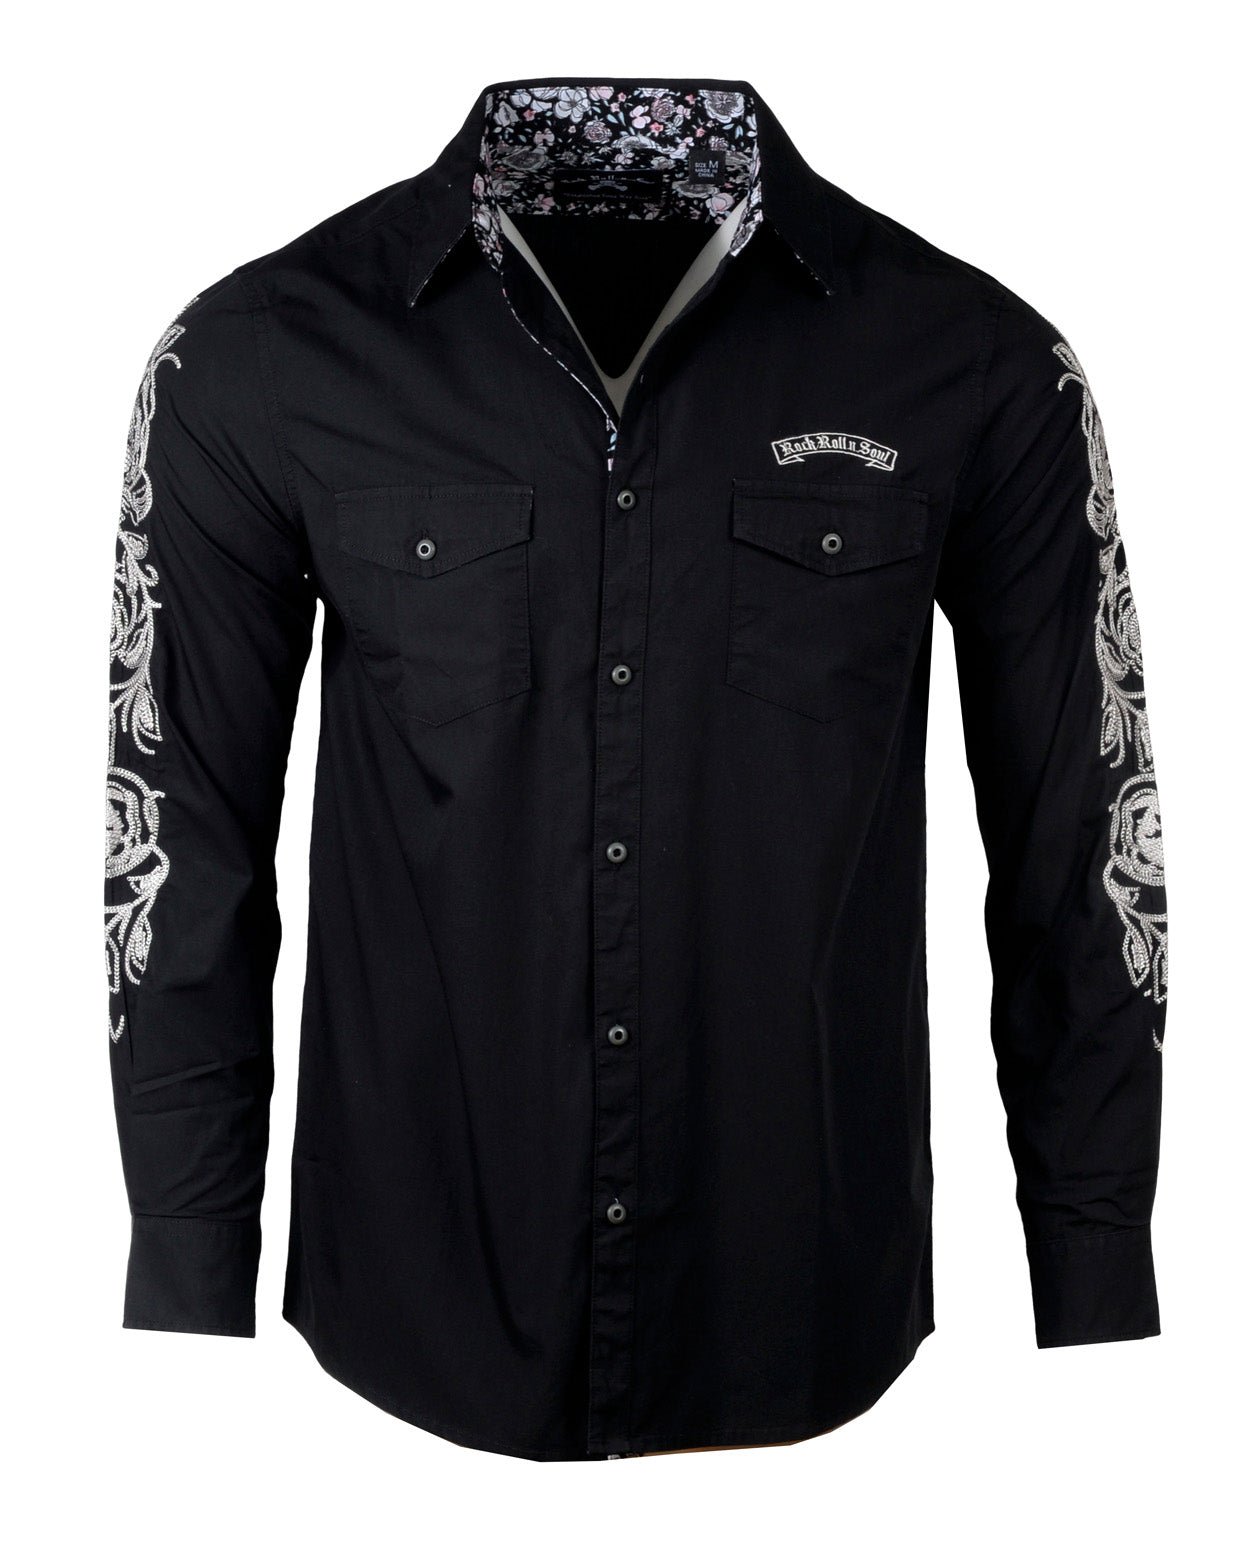 Men's Casual Fashion Button Up Shirt - Live Wire II by Rock Roll n Soul